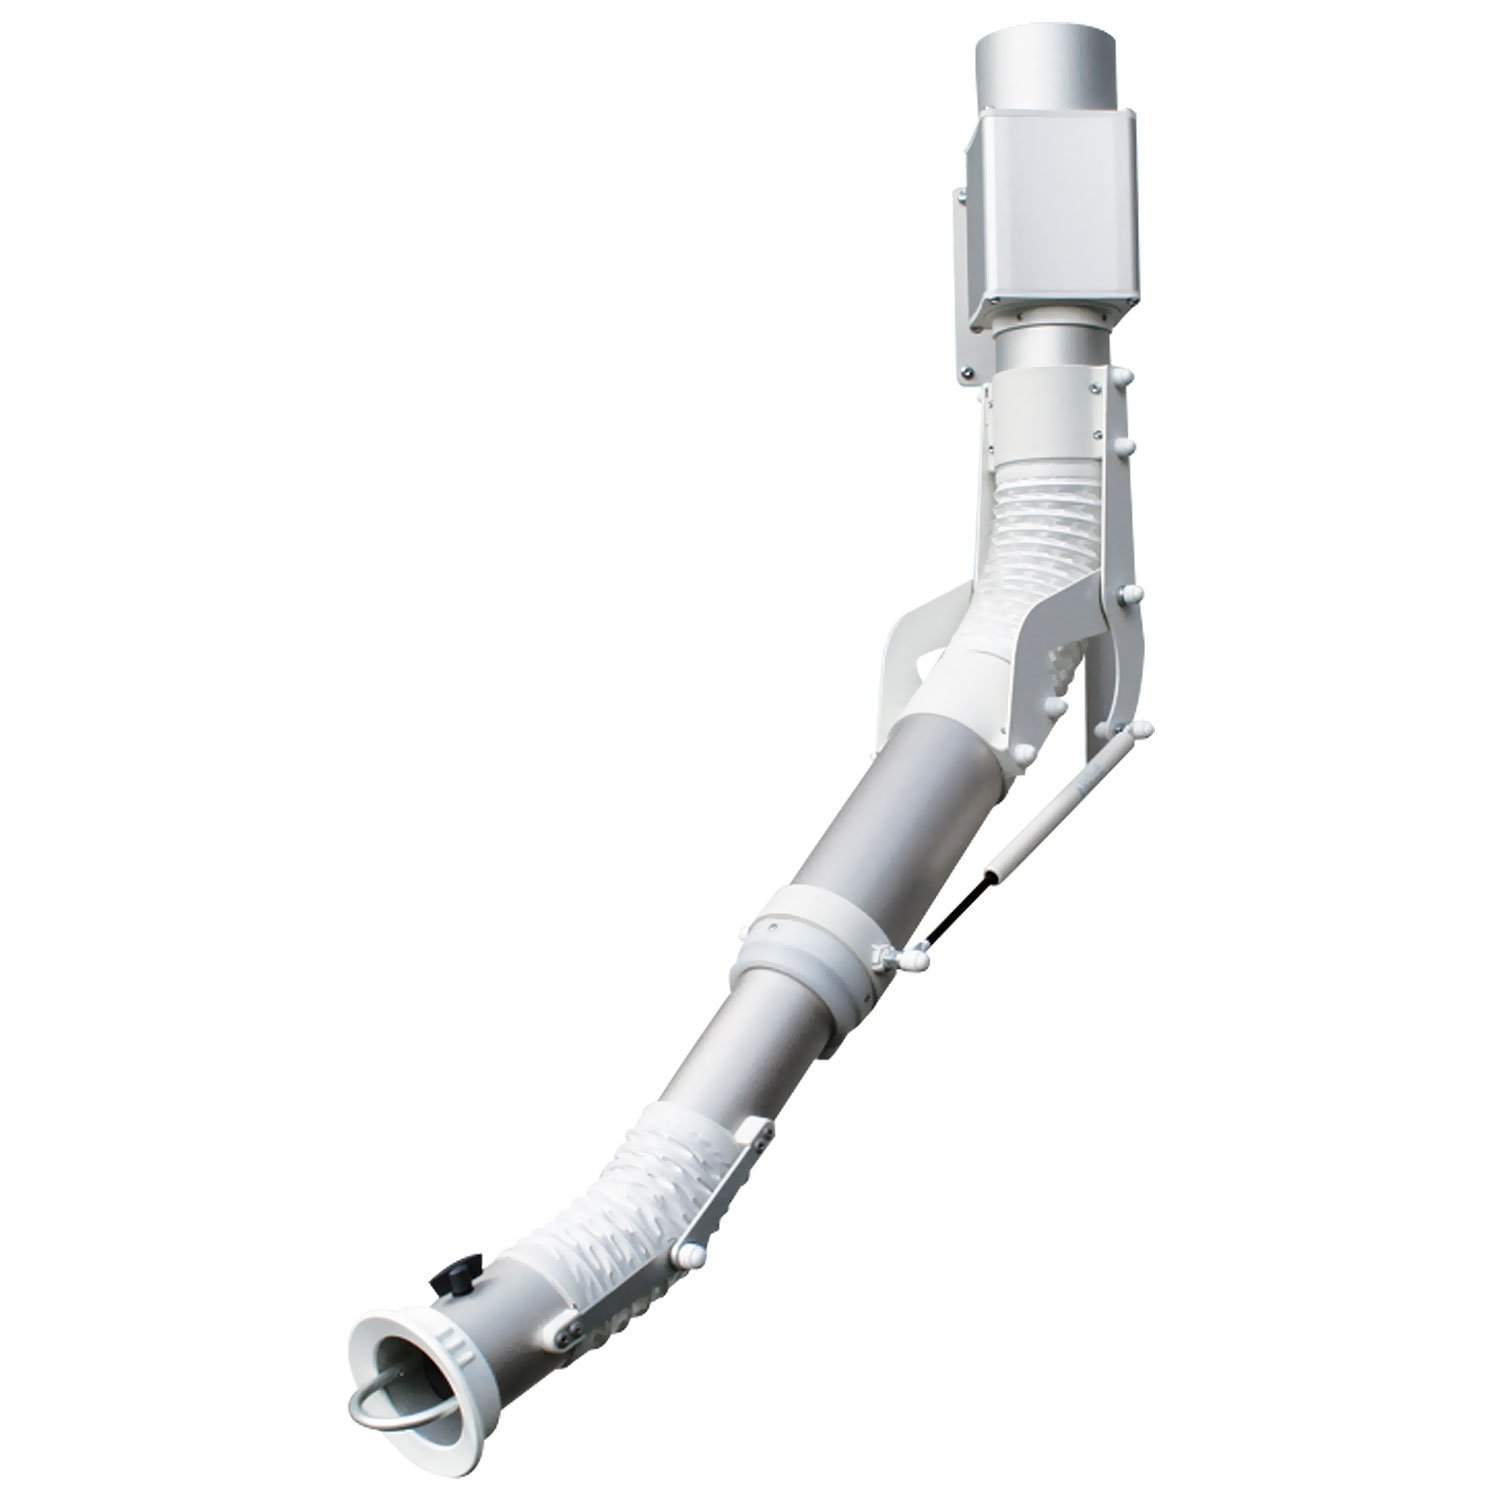 MiniTEX Extraction Arm - Extraction Arms for Labs | AIRPLUS Industries